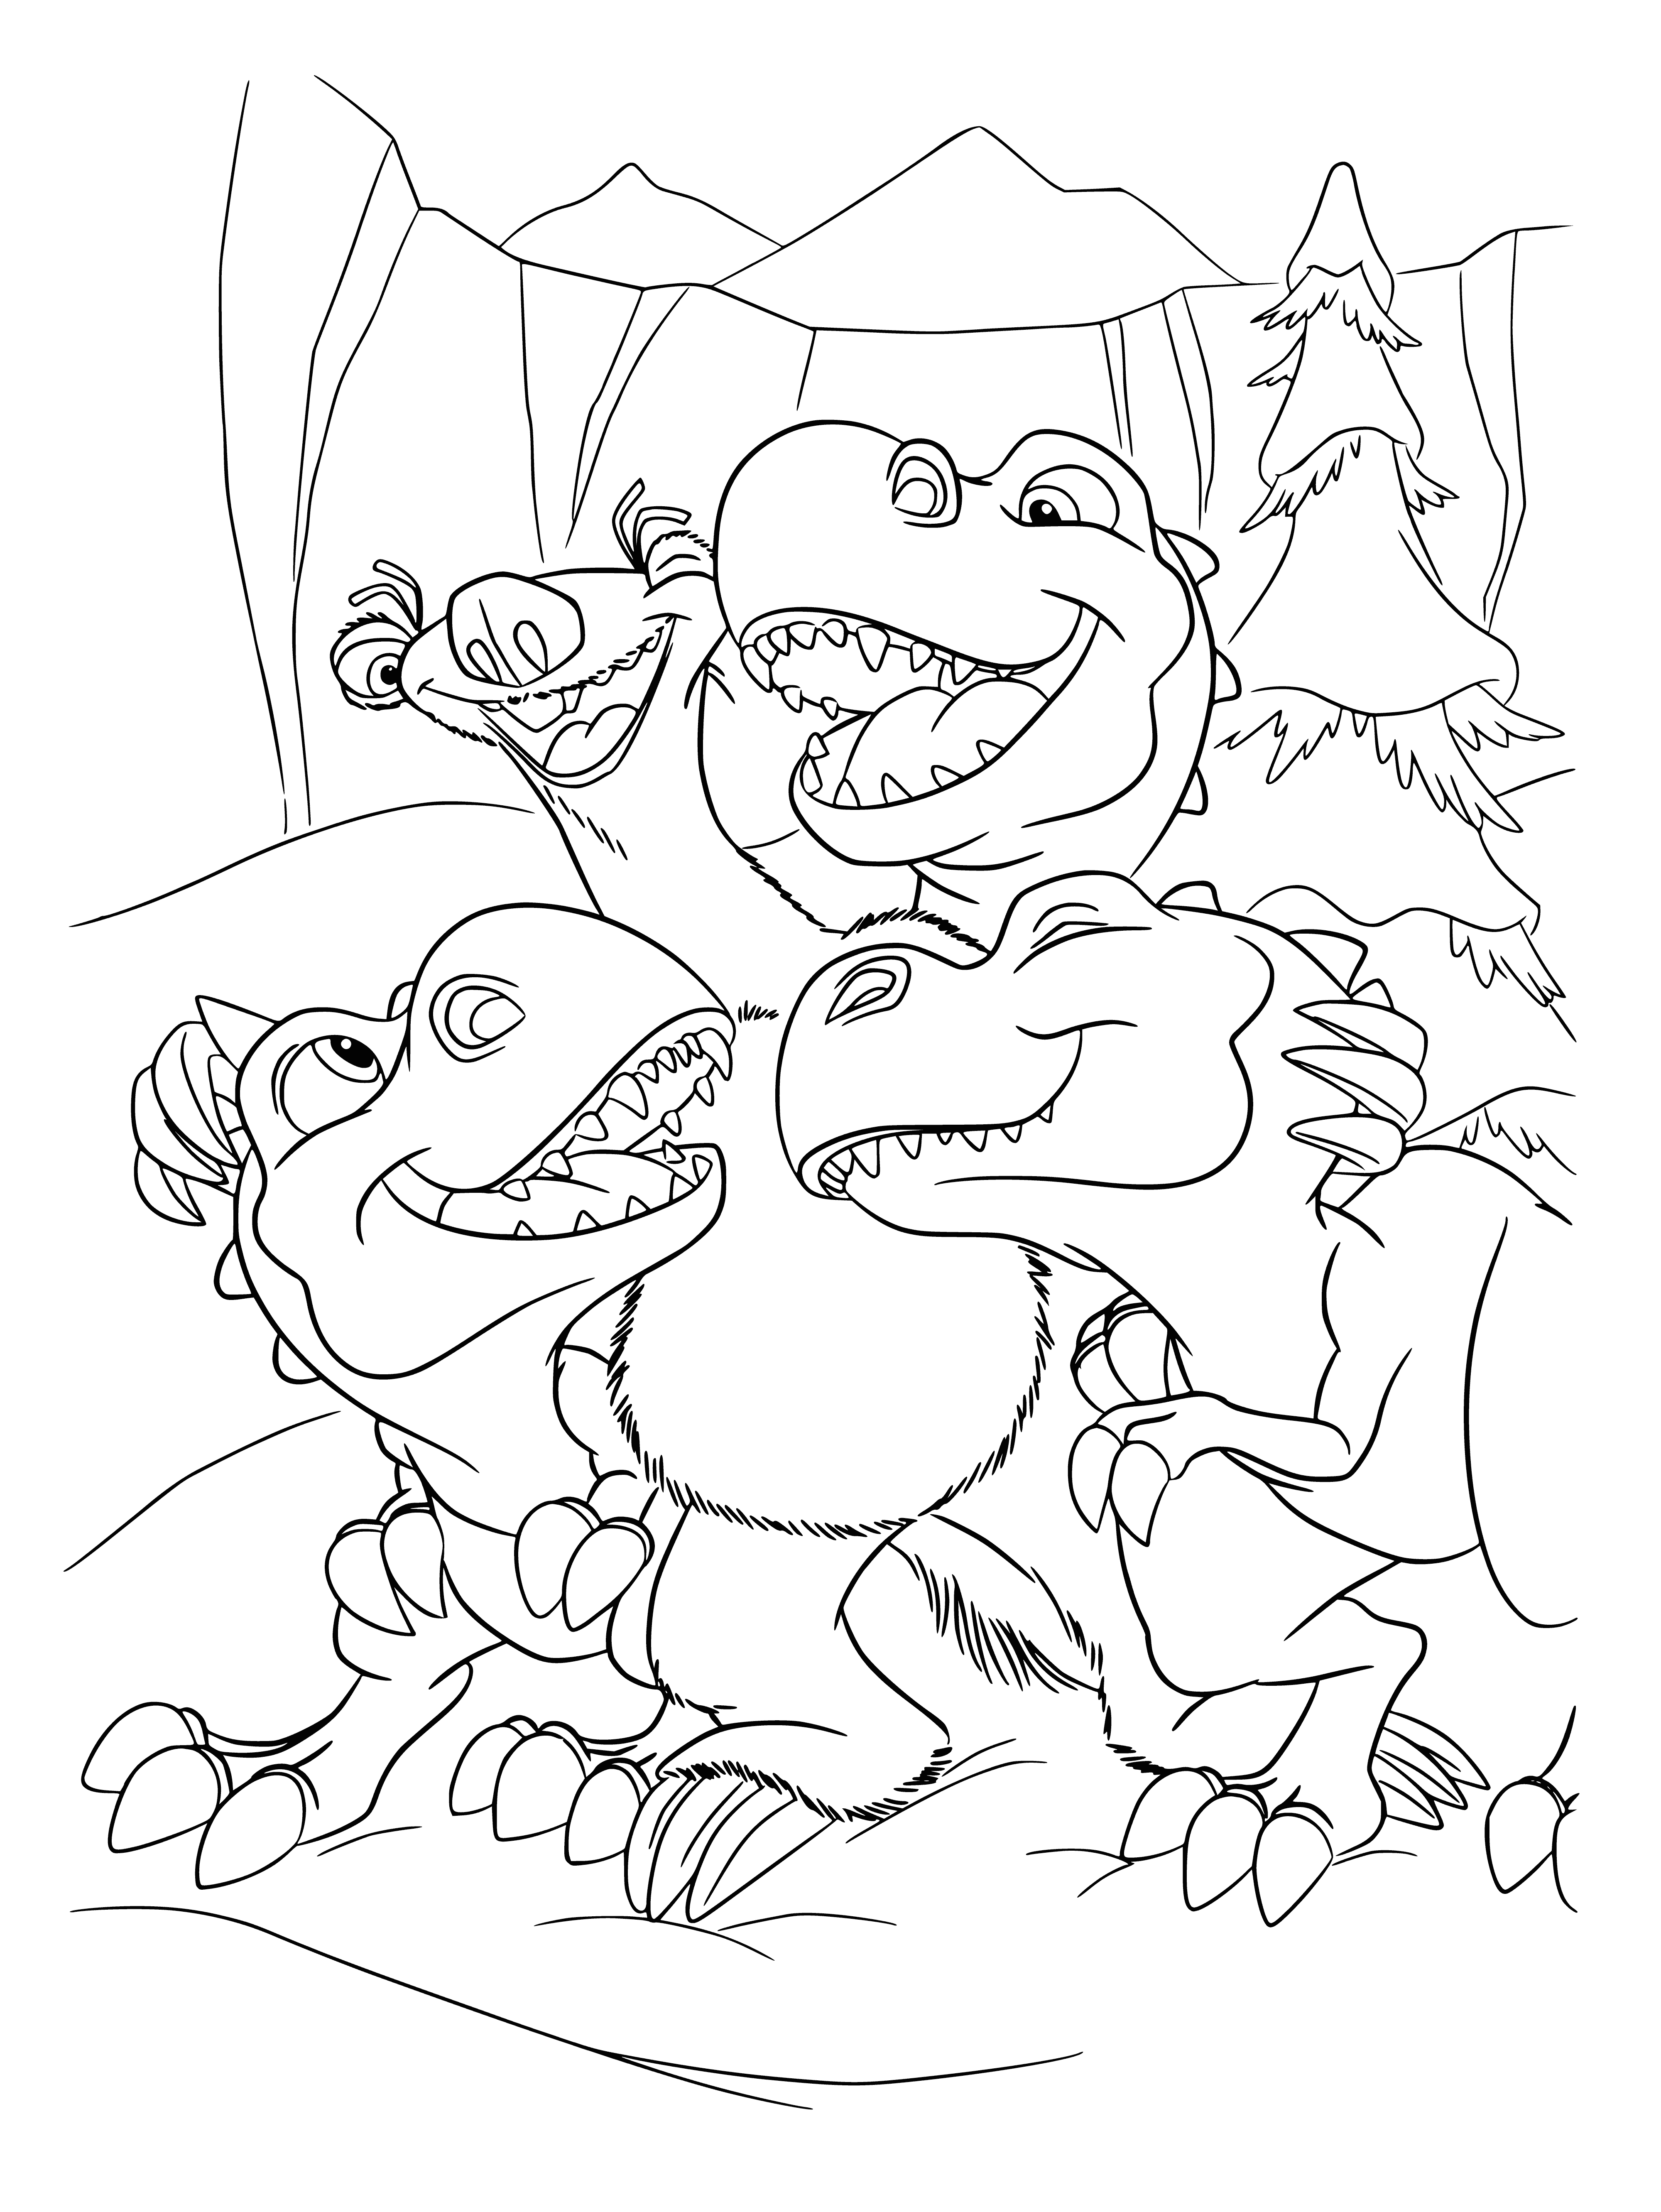 coloring page: Sid is a mother sloth in the Ice Age, surrounded by her three kids playing: swinging, sliding & chewing.